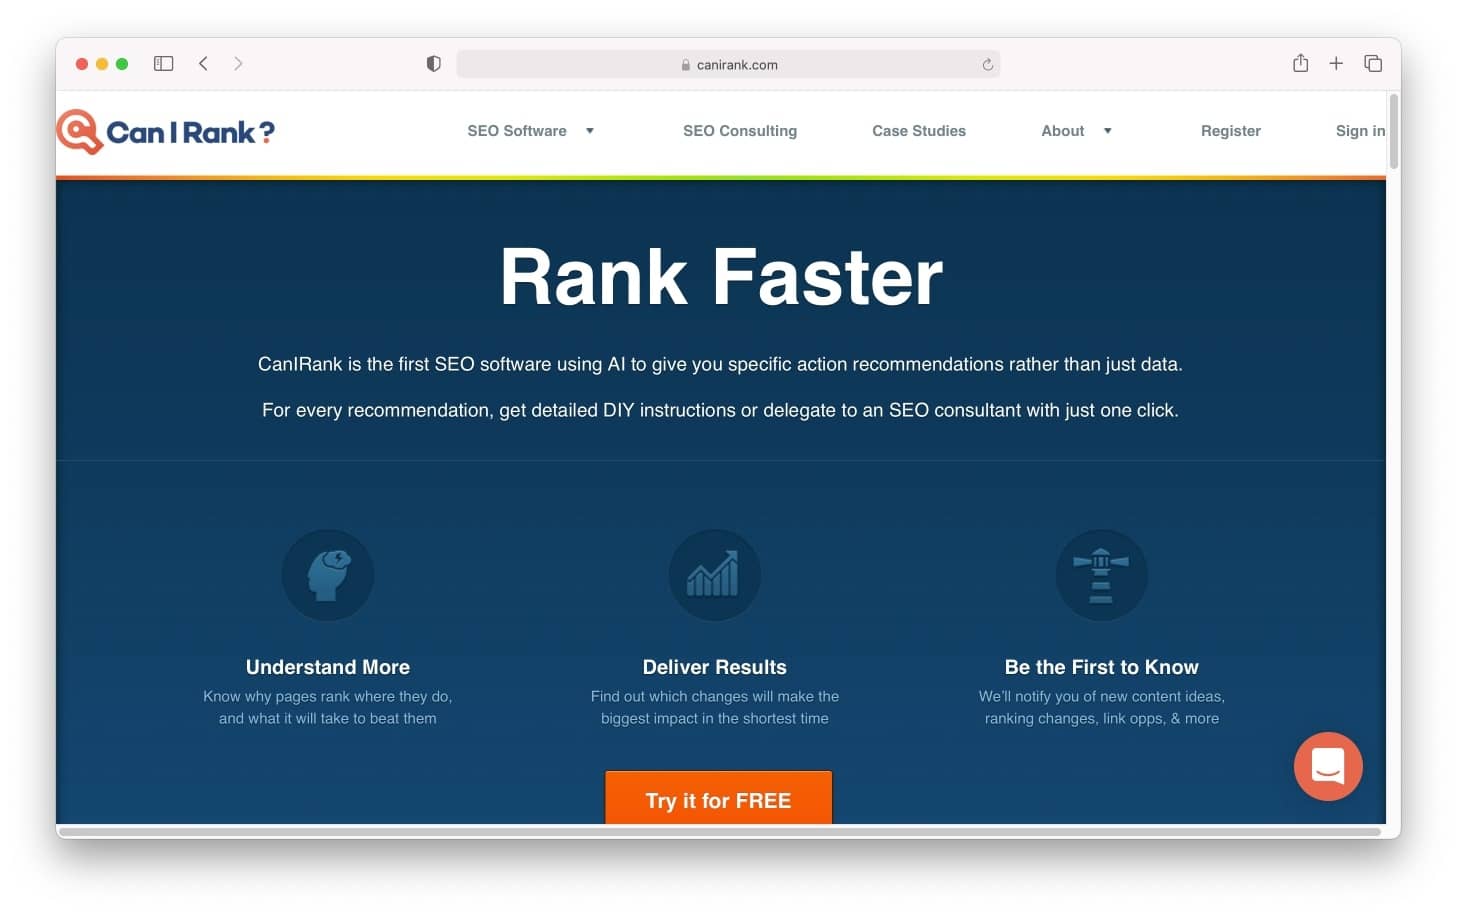 Can I rank is an SEO tool with multiple options